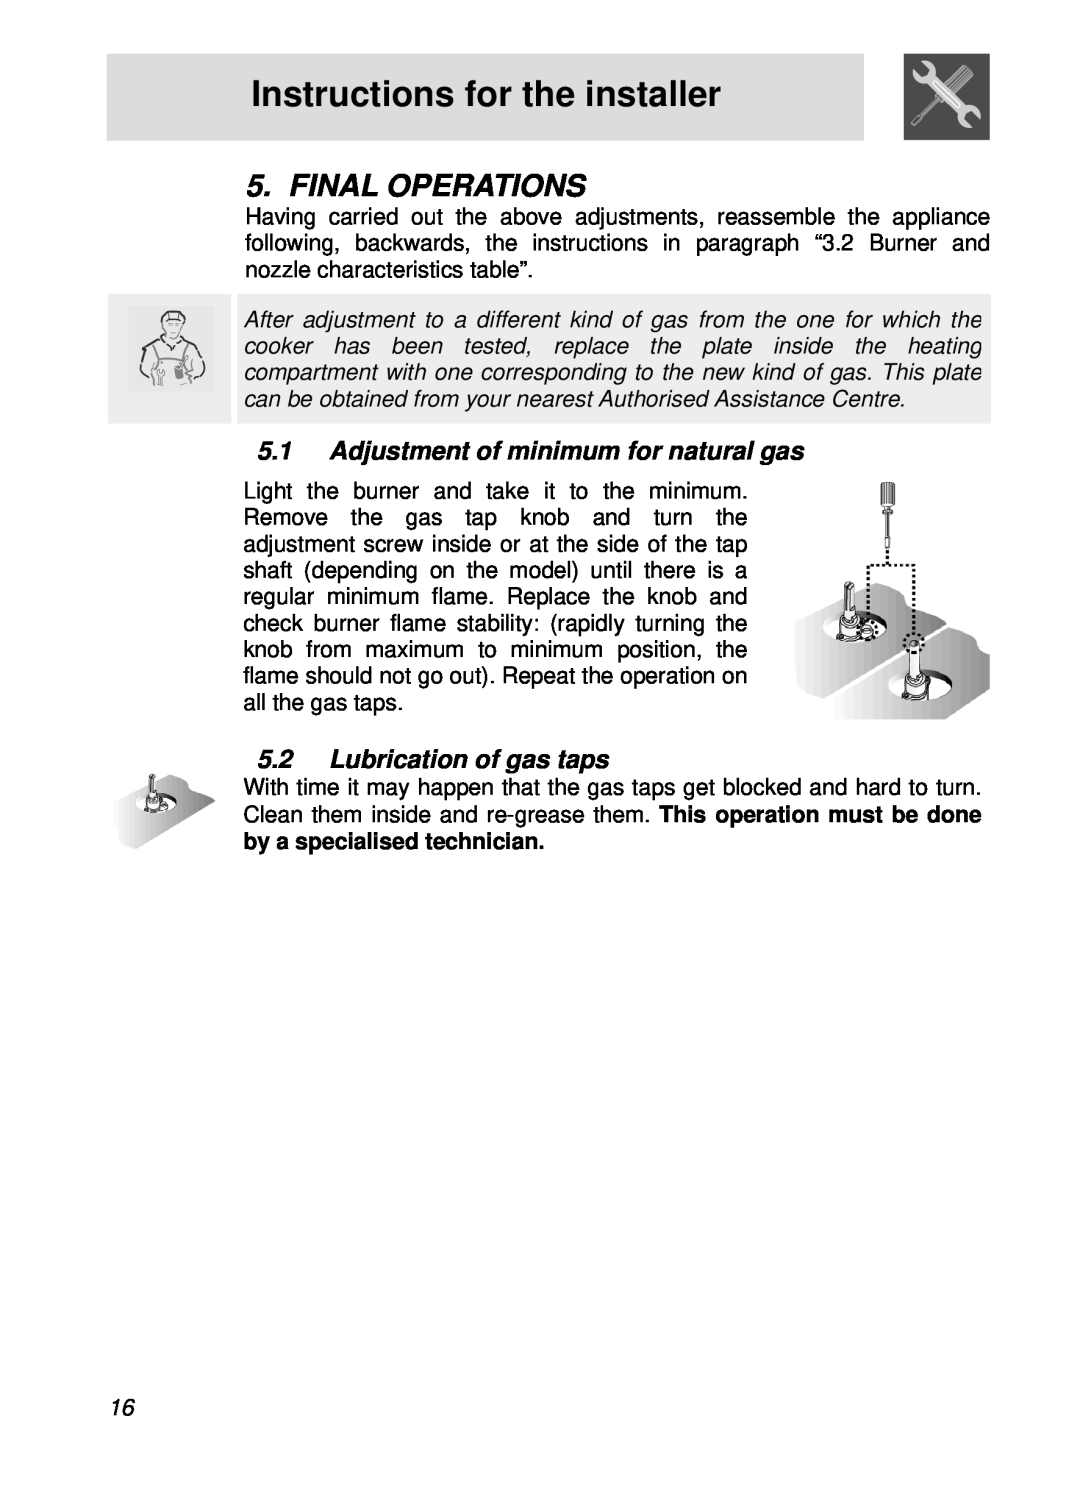 Smeg PGFA95F manual Final Operations, Adjustment of minimum for natural gas, Lubrication of gas taps 